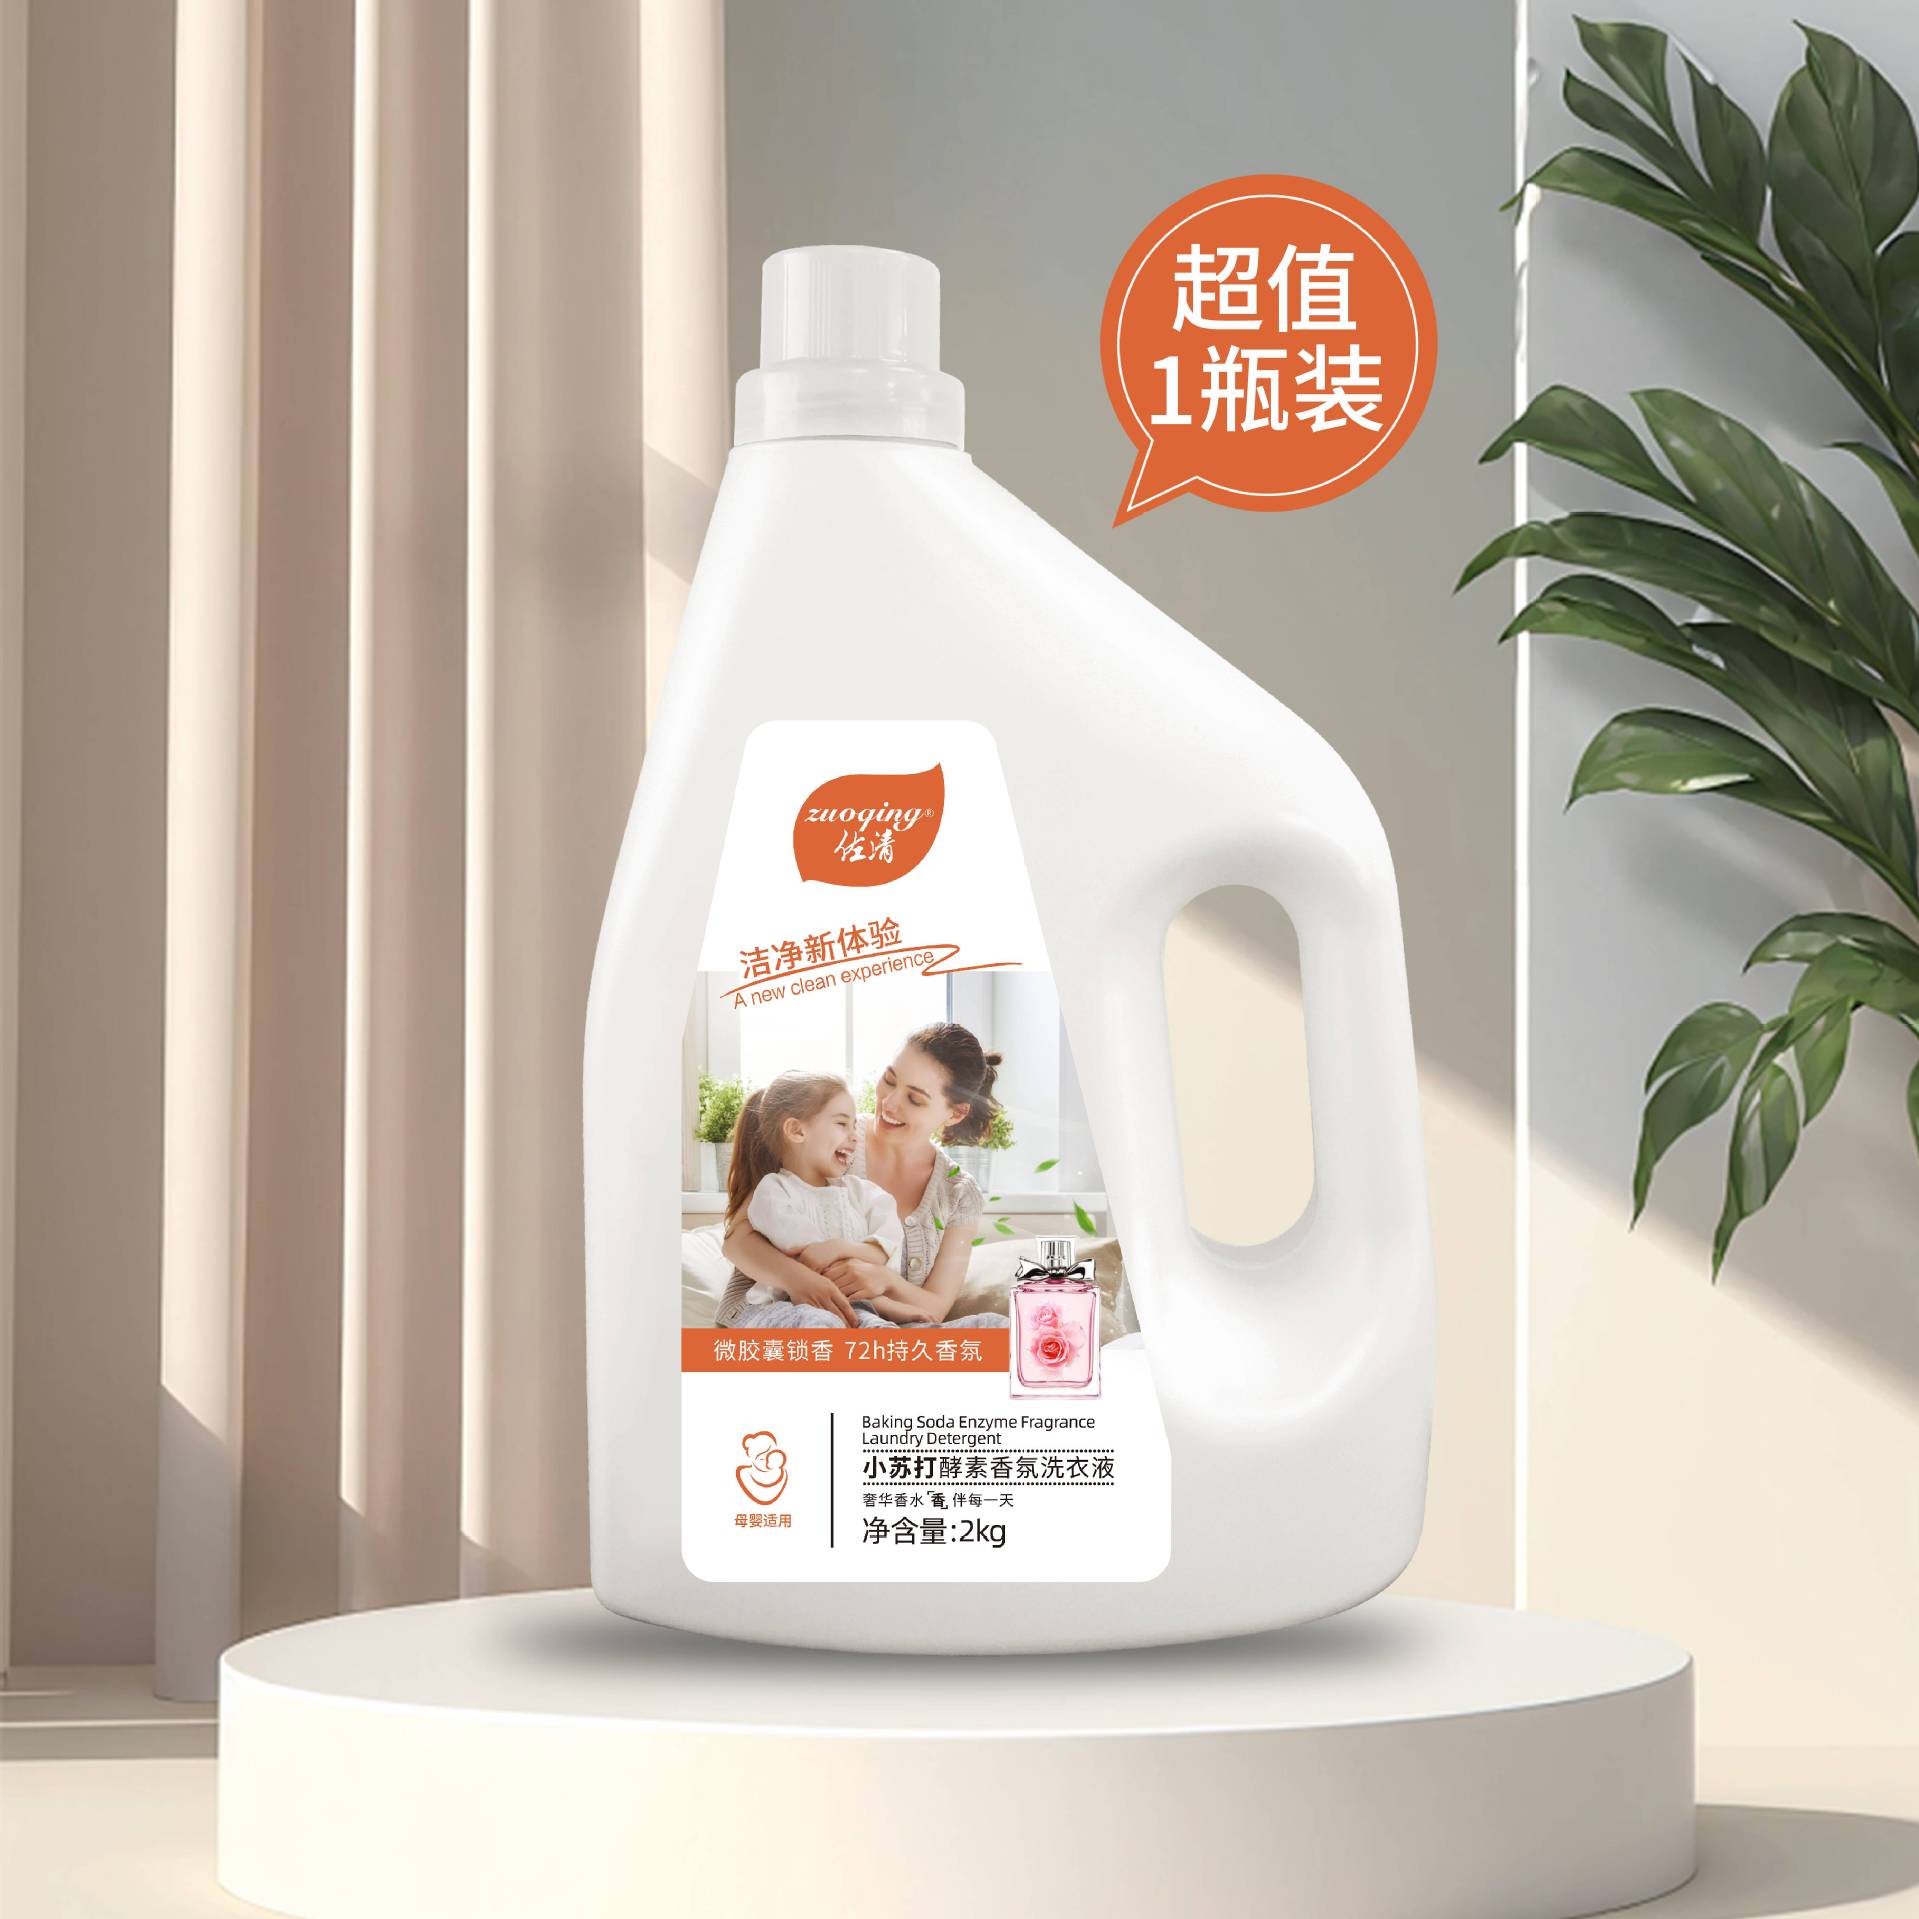 Soda Enzyme Fragrance Laundry Detergent Wholesale Bright White Stain Removal Fragrance Household Authentic Laundry Detergent Volume Batch Full Box